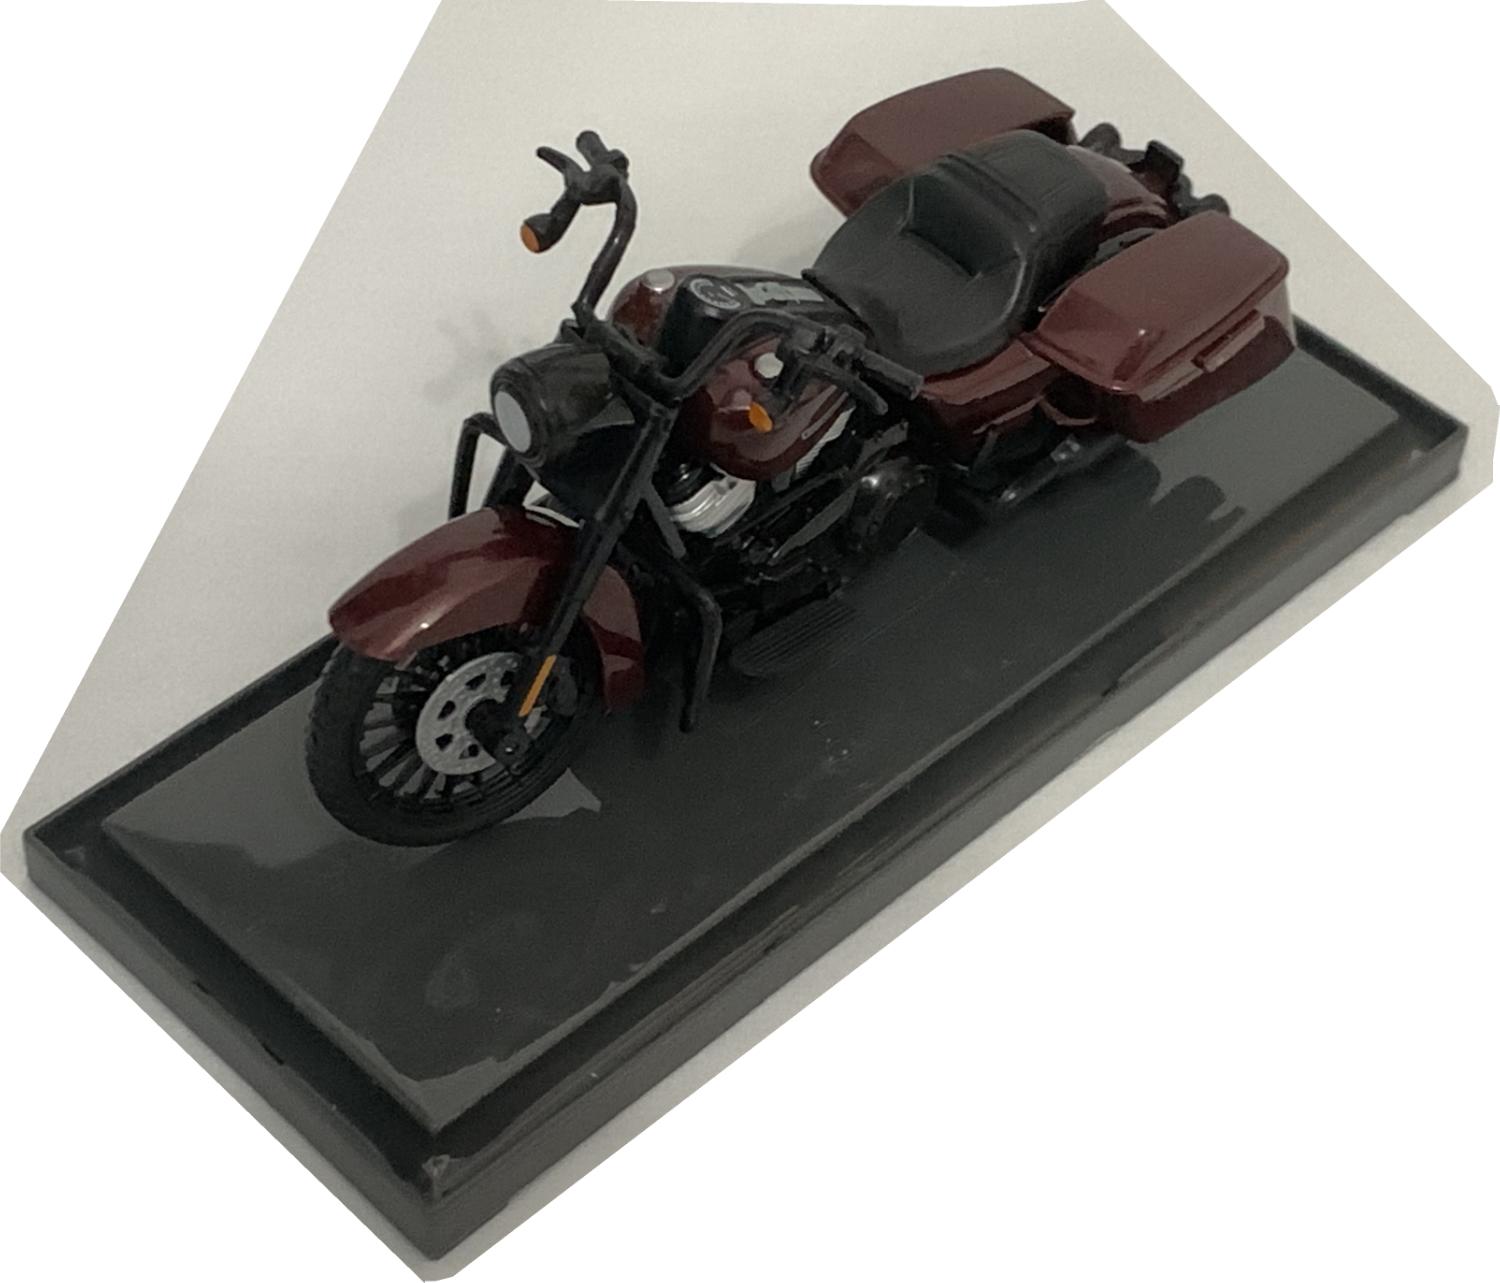 Harley Davidson 2017 Road King Special in burgundy 1:18 scale model from Maisto